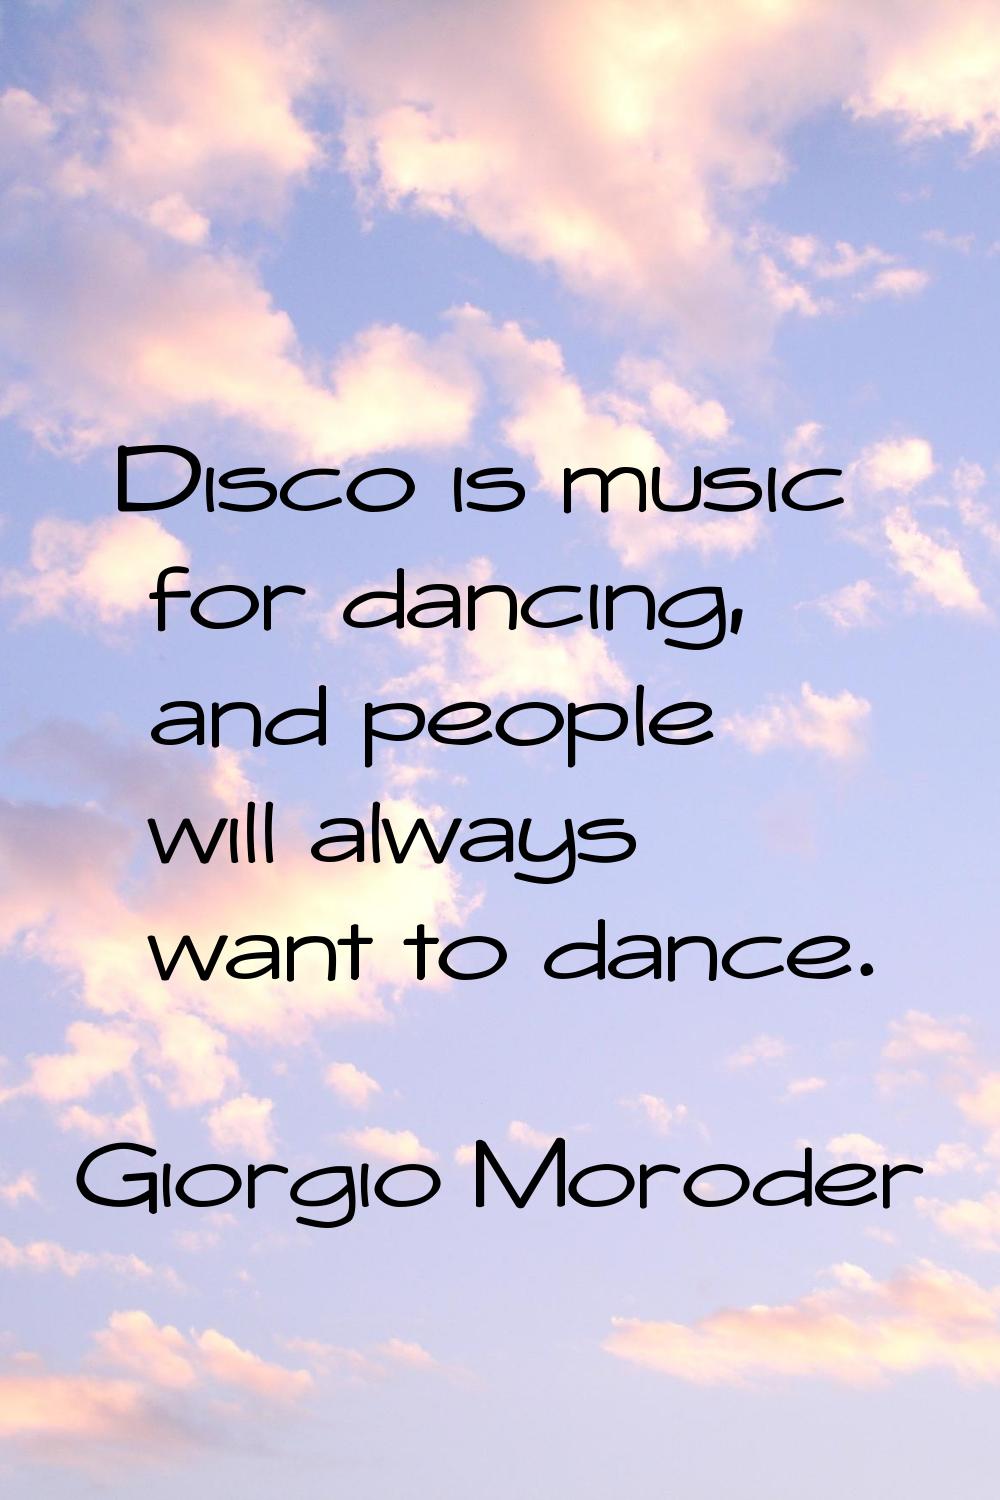 Disco is music for dancing, and people will always want to dance.